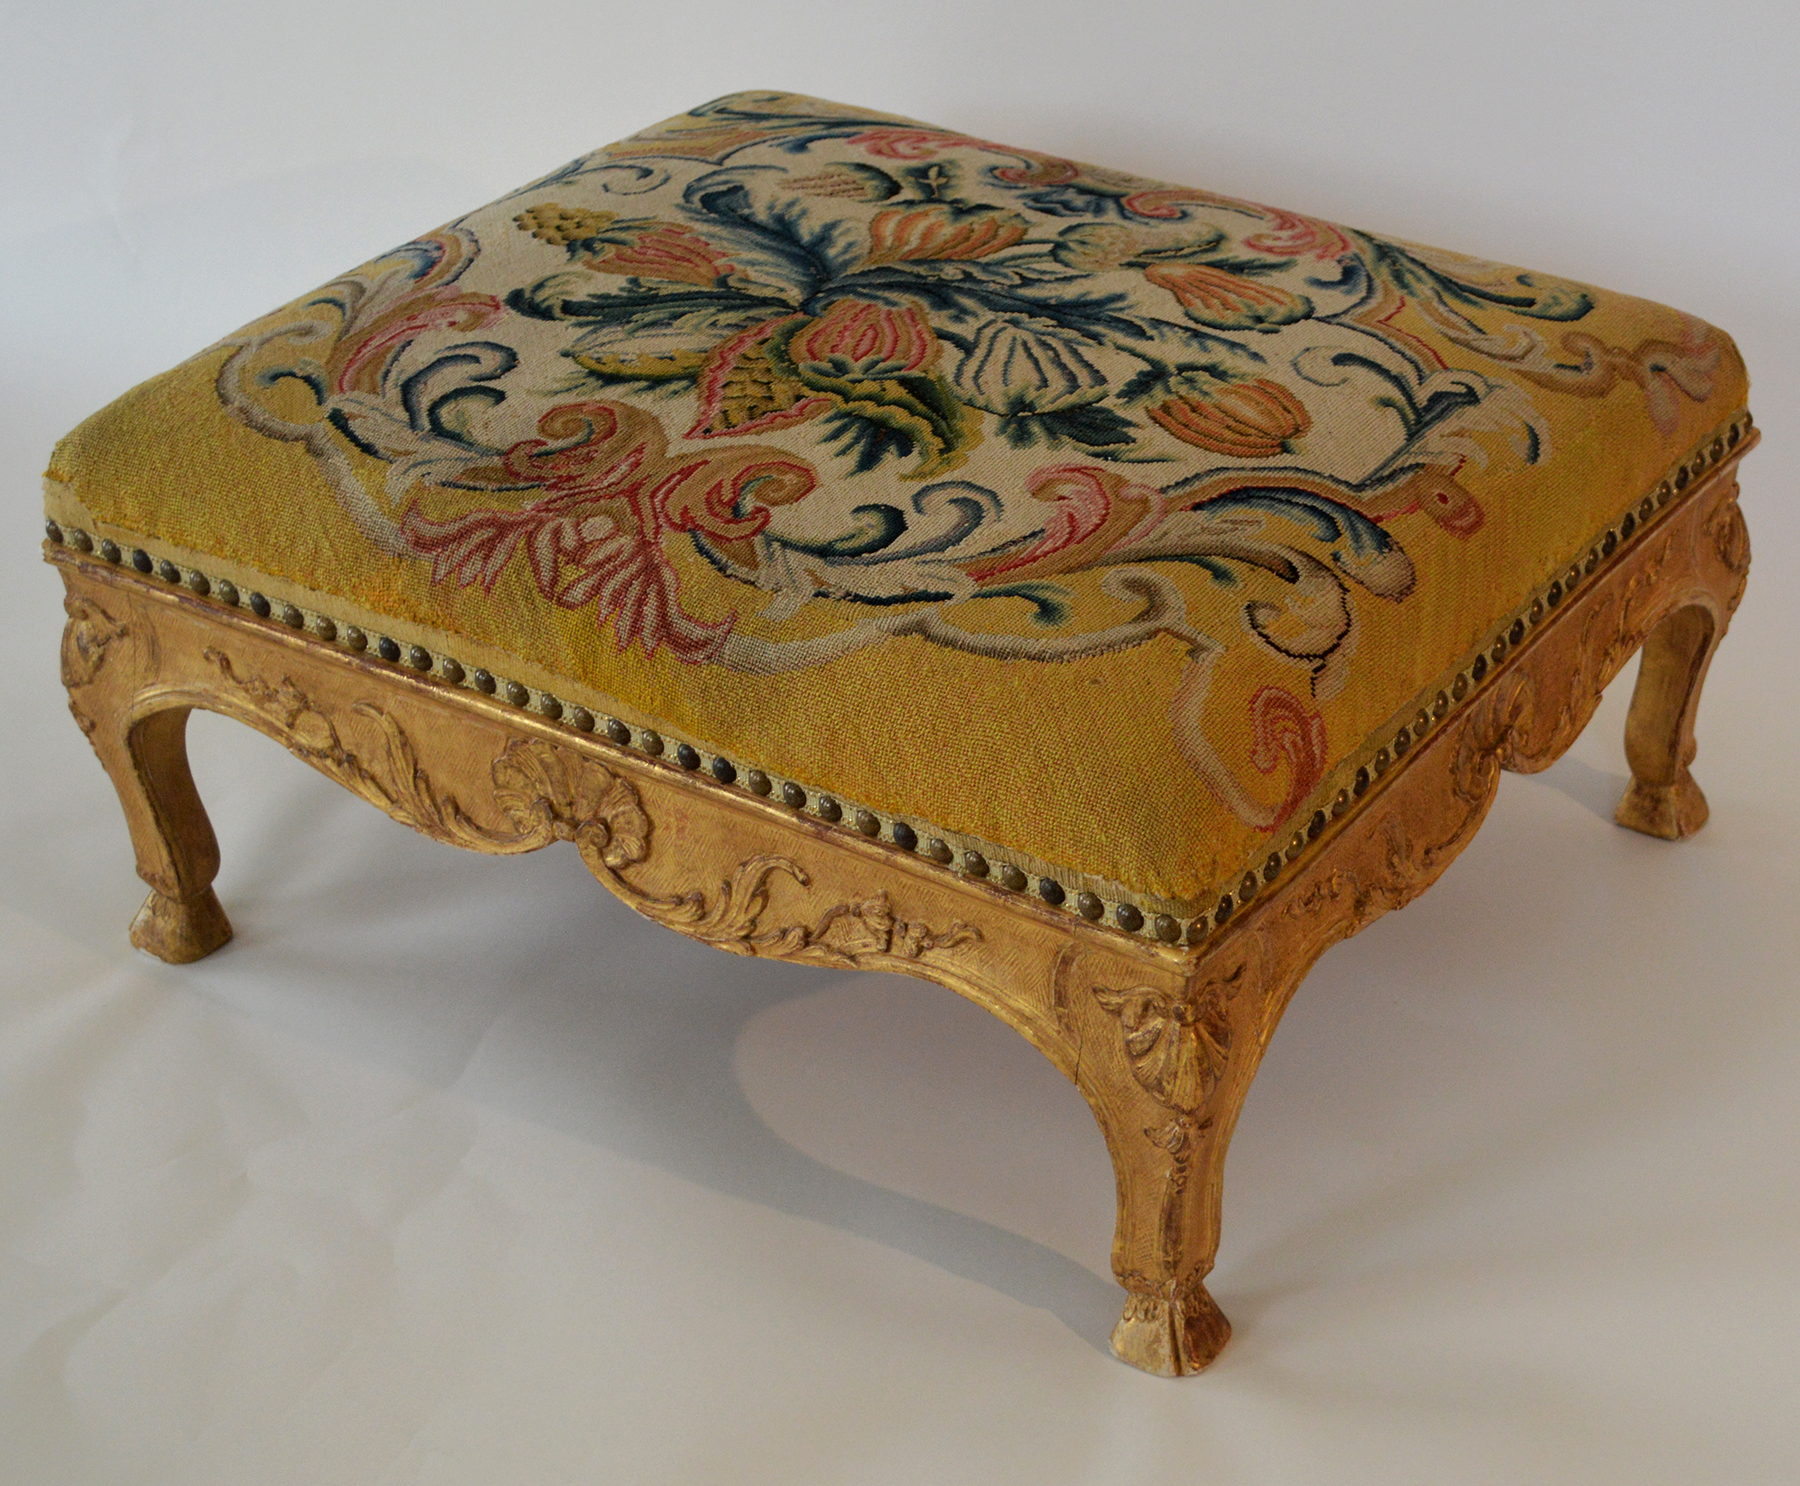 French, Regence period tabouret